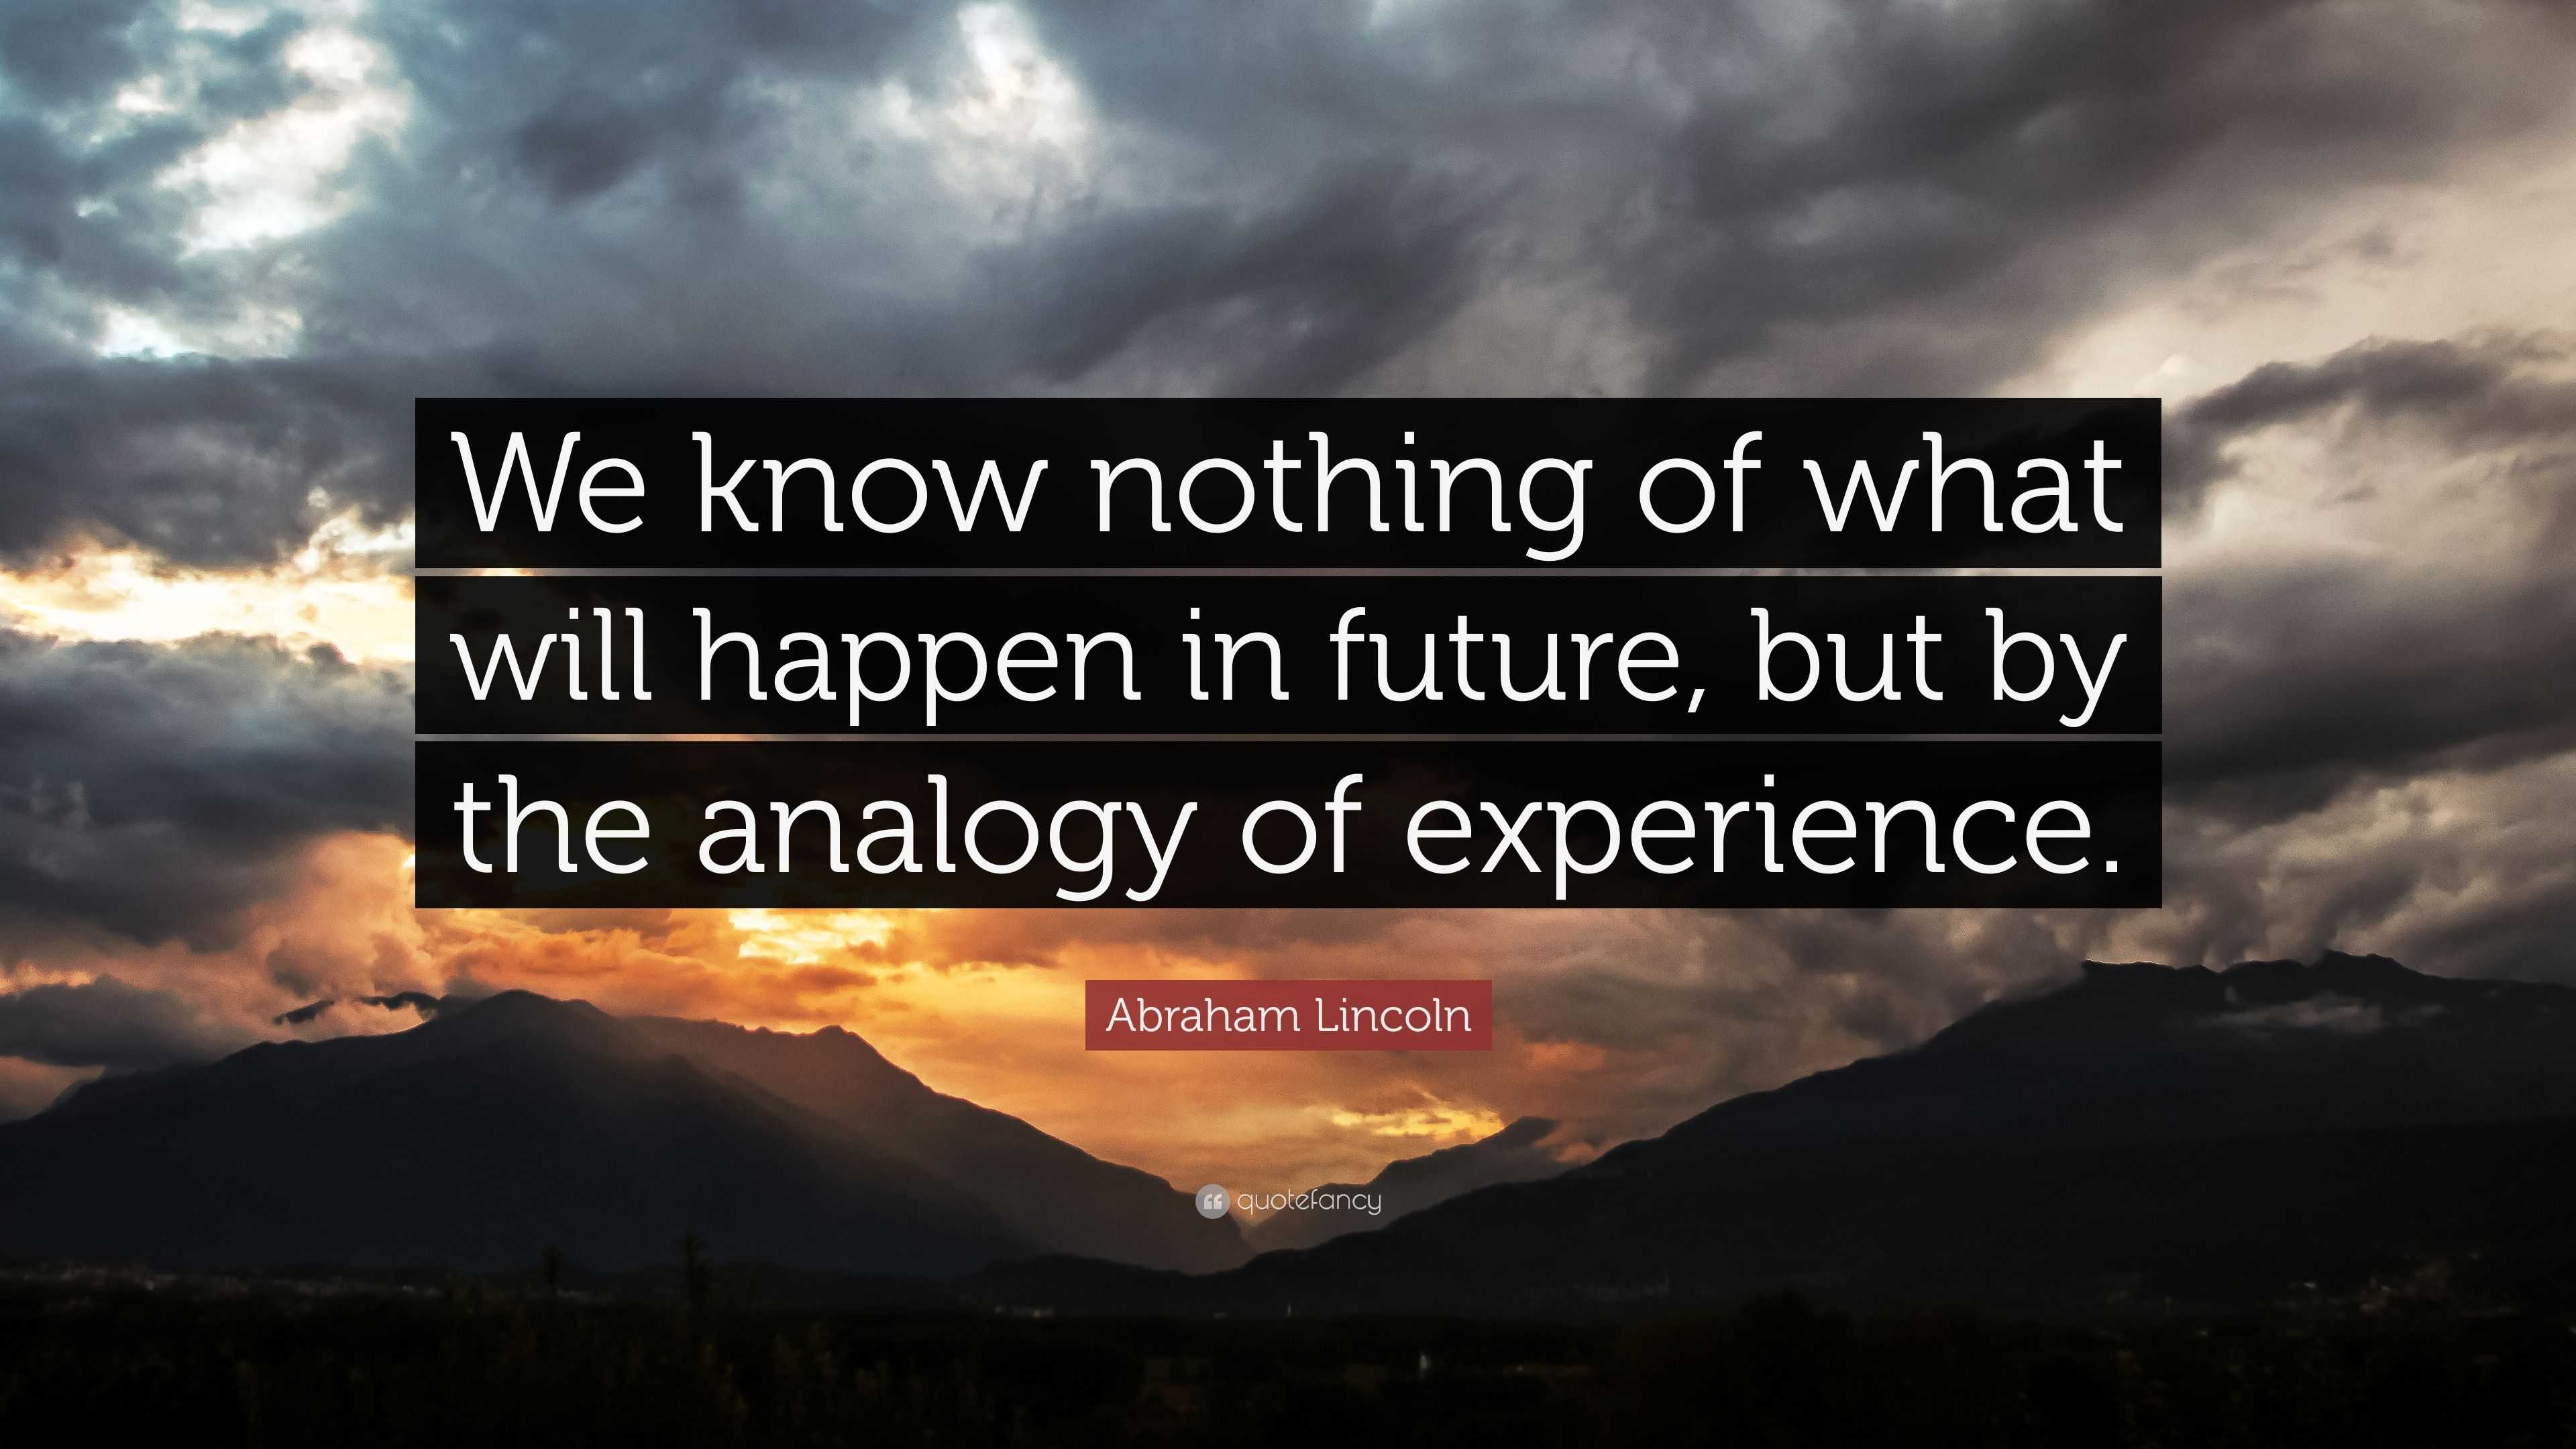 Abraham Lincoln Quote: “We know nothing of what will happen in future ...